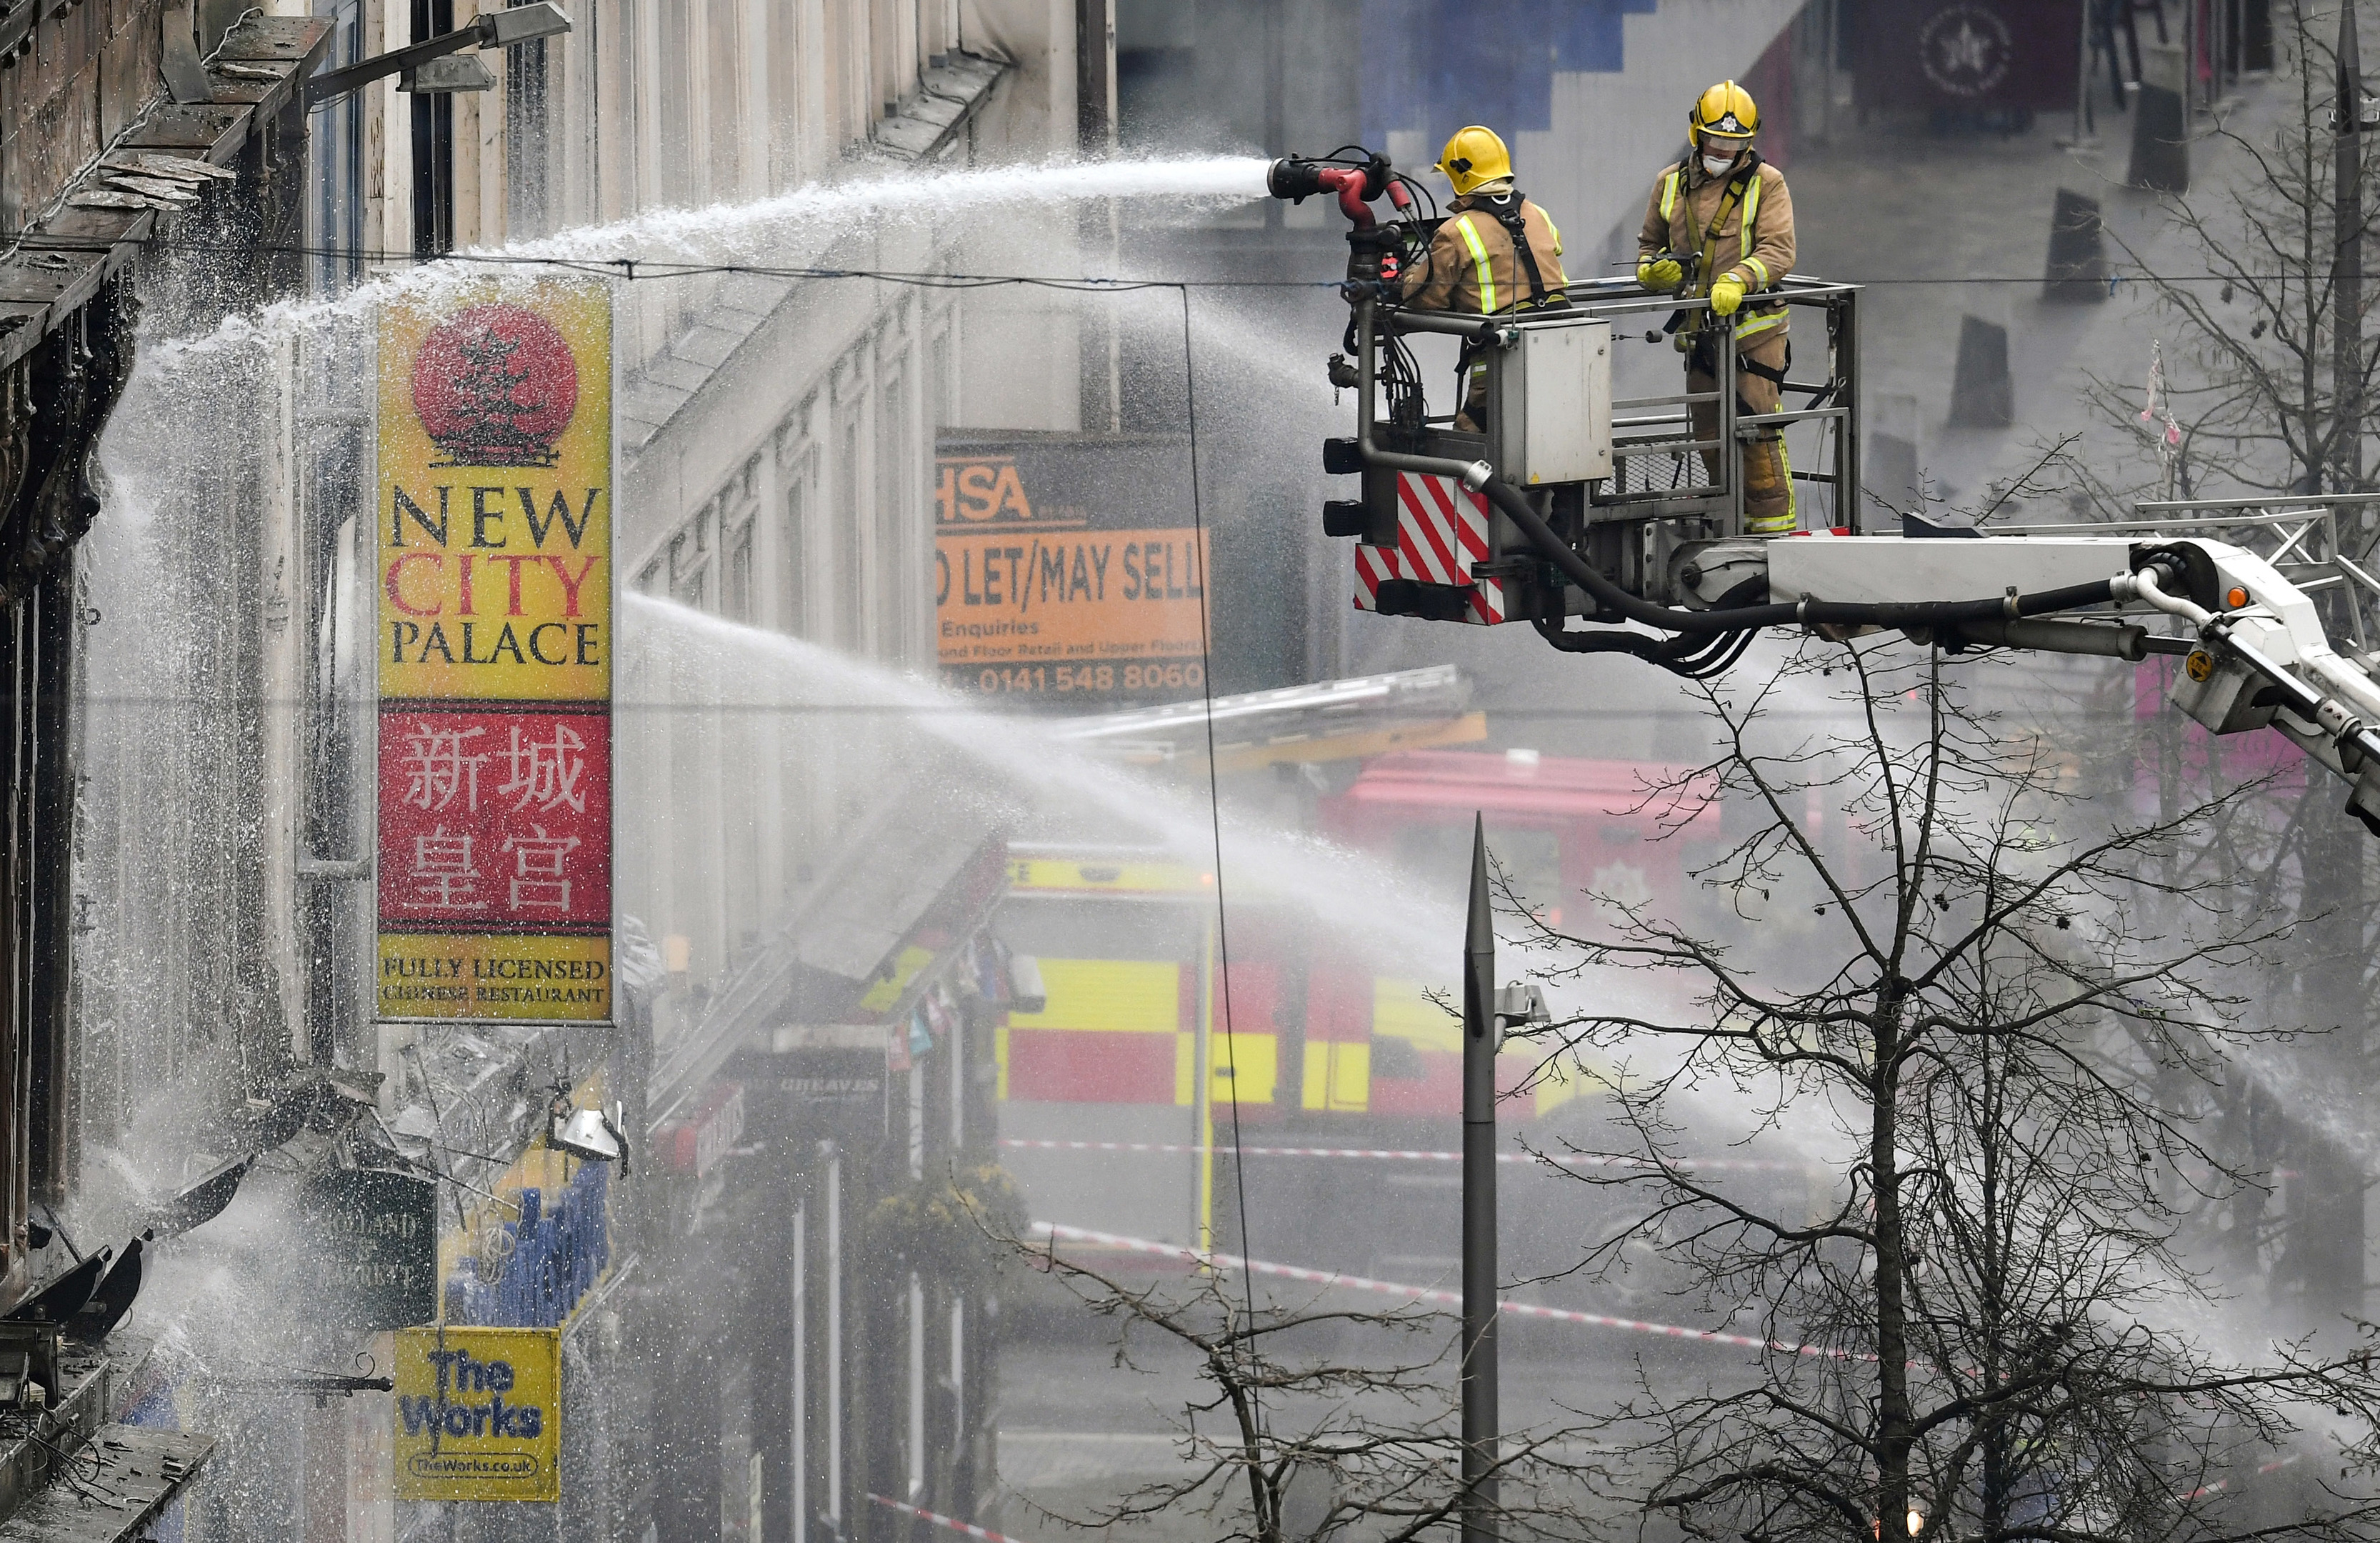 Fire crews tackle the blaze (Jeff J Mitchell/Getty Images)